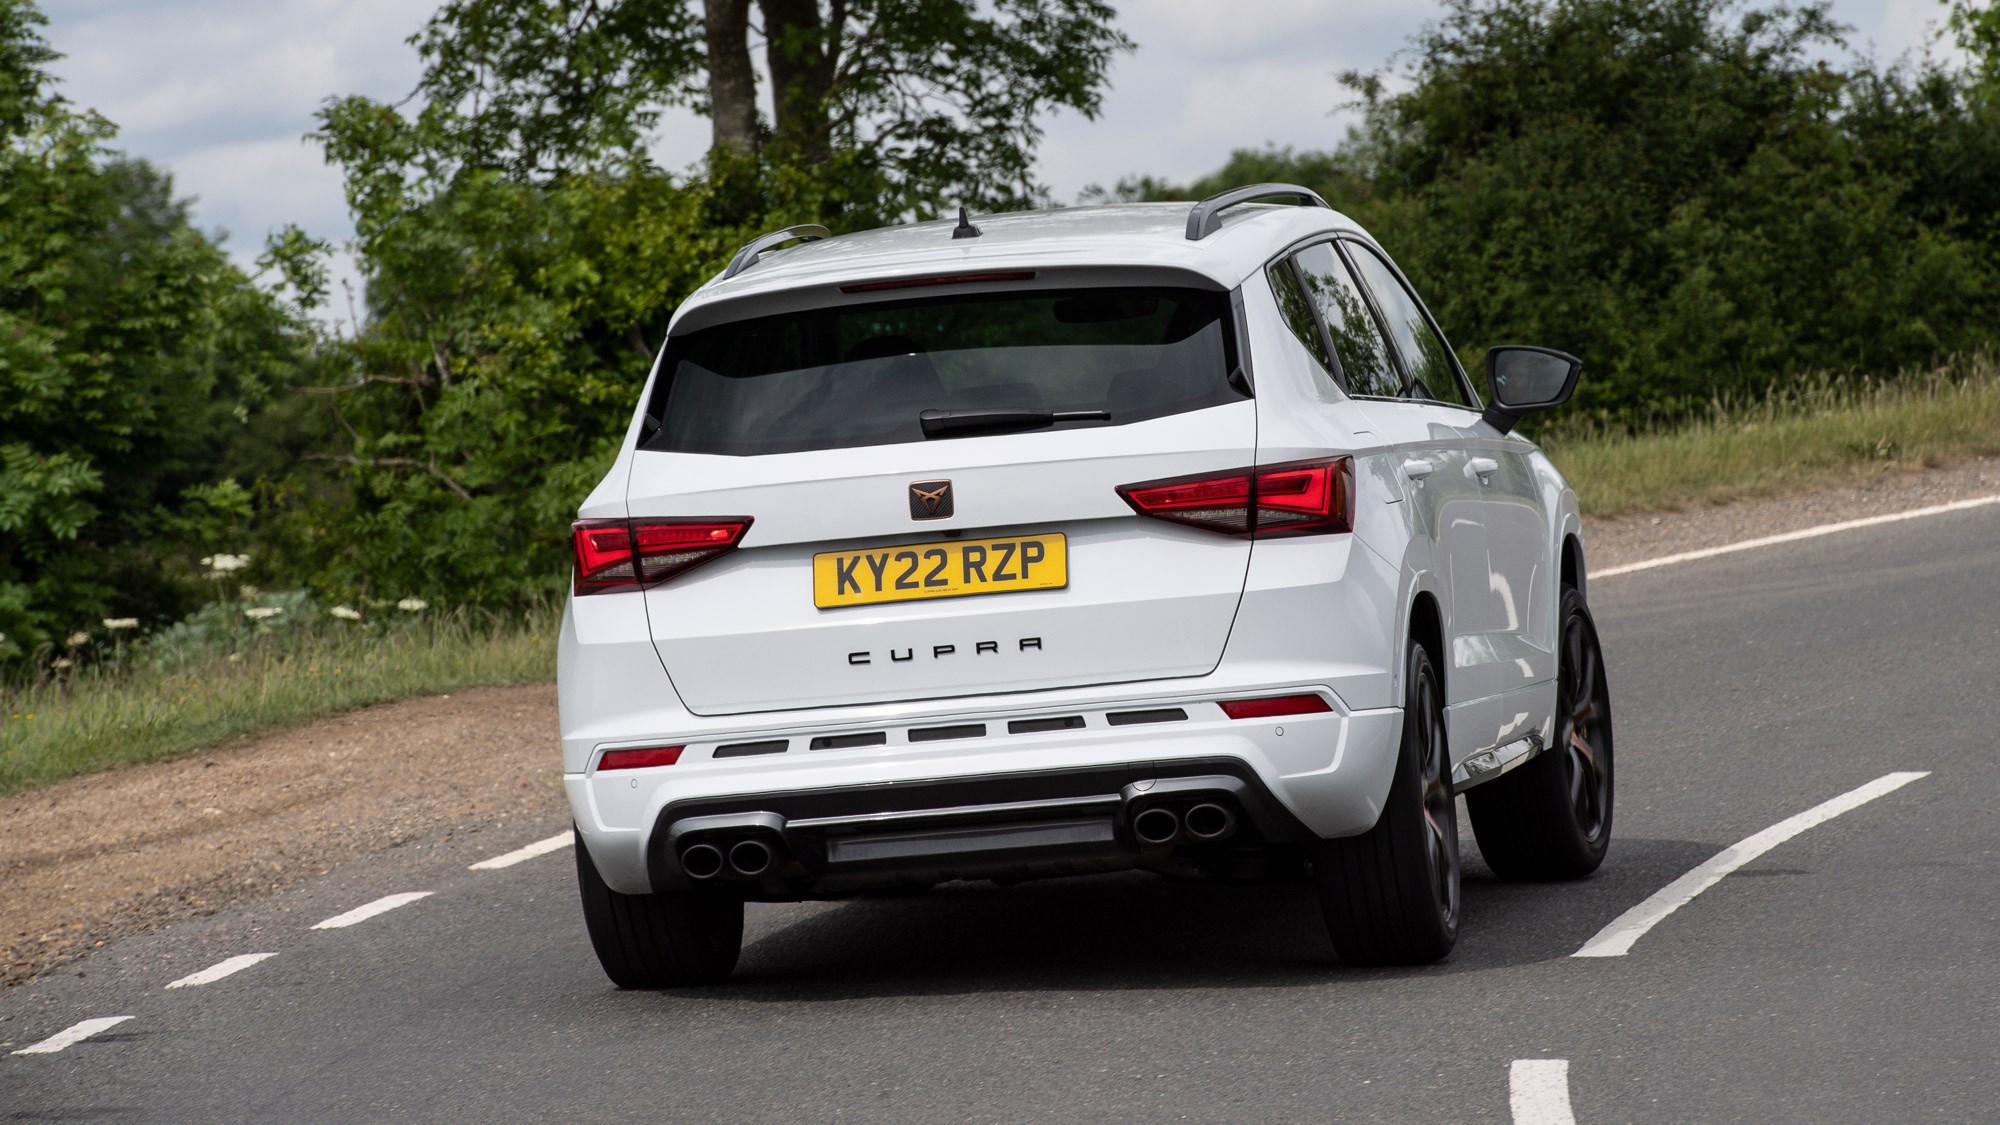 Cupra Ateca review - facelift, rear view, white, driving round corner